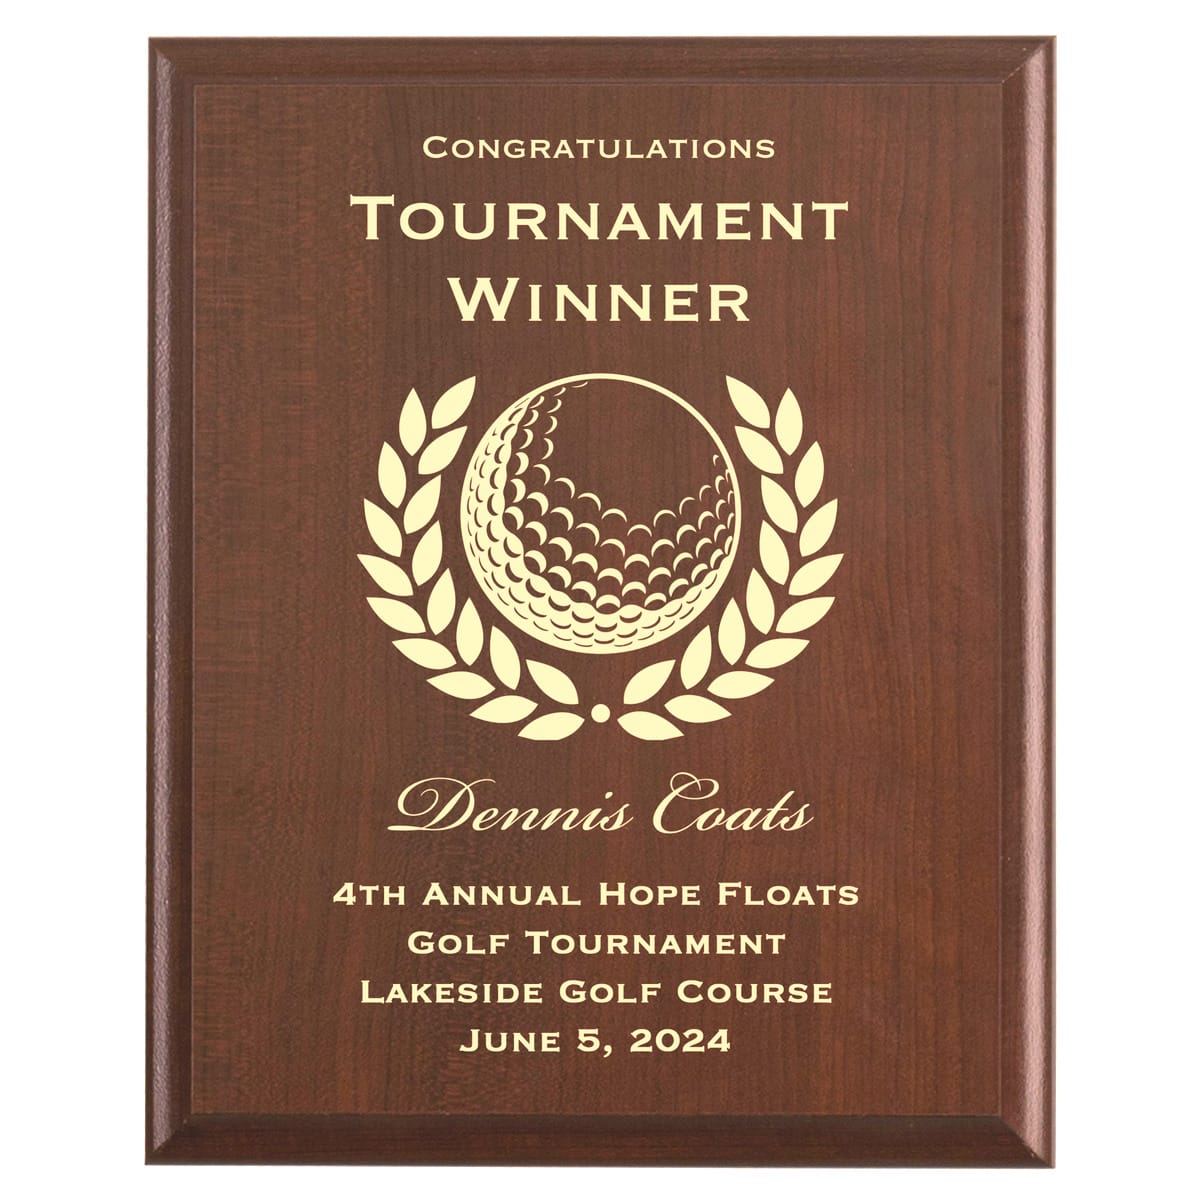 Plaque photo: Golf Tournament Award Plaque design with free personalization. Wood style finish with customized text.